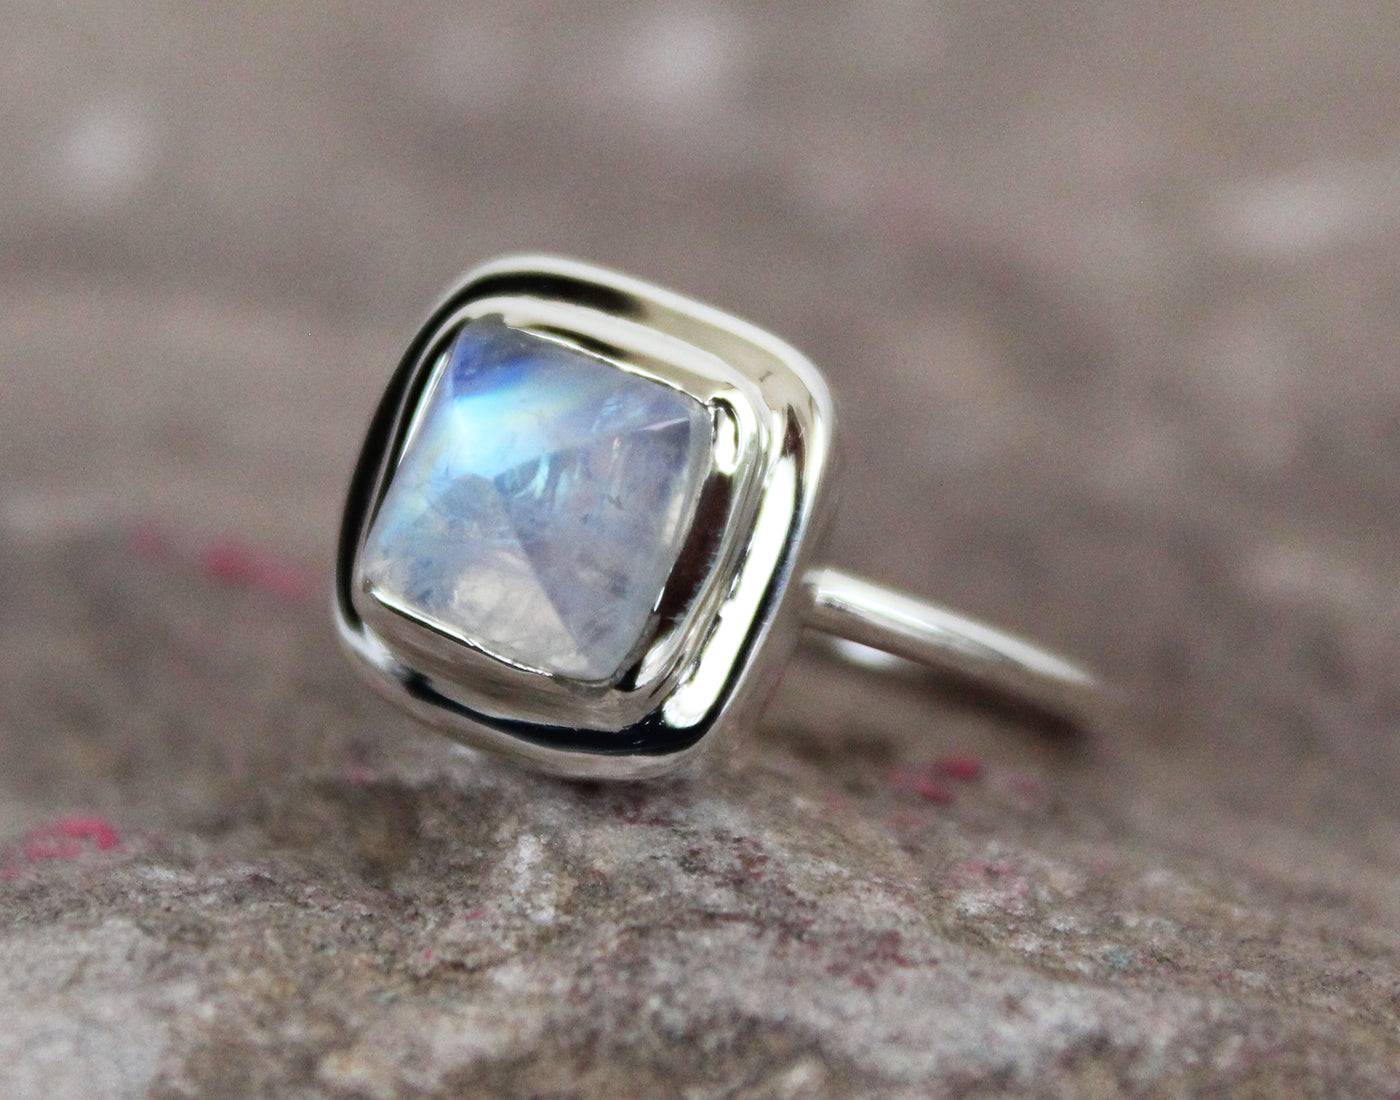 Rainbow Moonstone Ring, AAA Quality Gemstone Ring 925, Gift For Her, Sterling Silver Ring, Simple Gemstone Ring